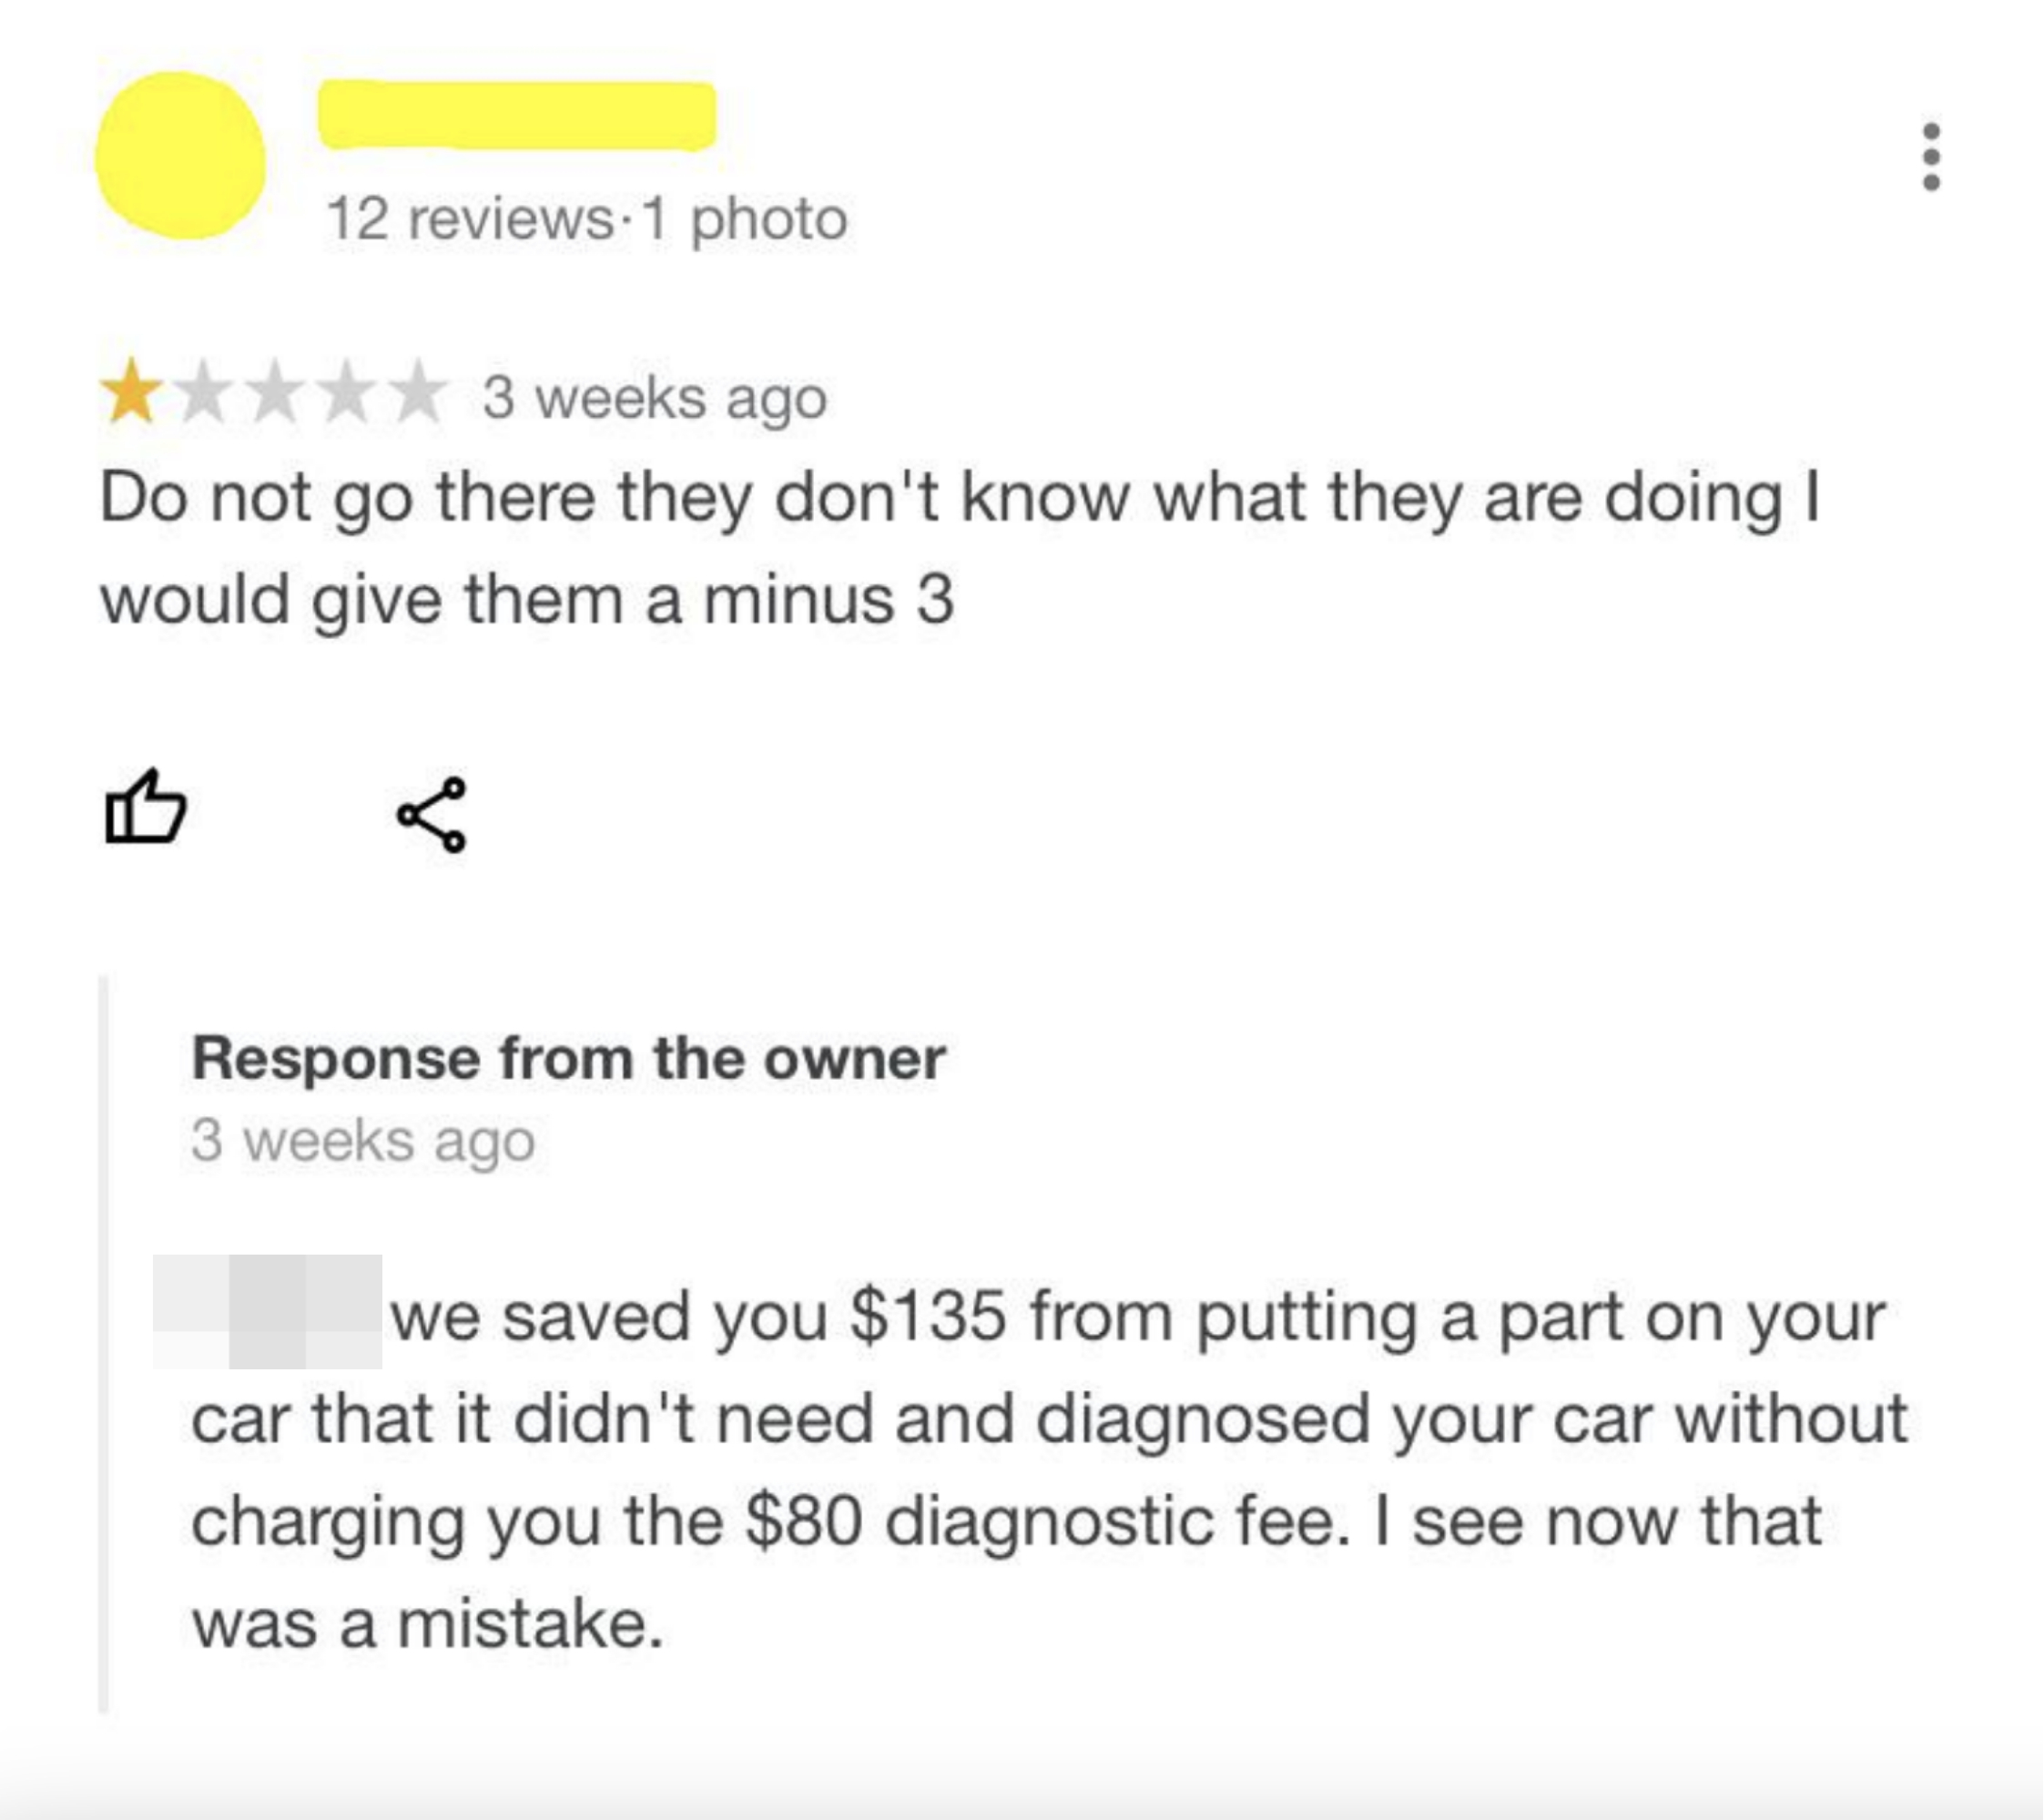 &quot;we saved you $135 from putting a part on your car that it didn&#x27;t need&quot;